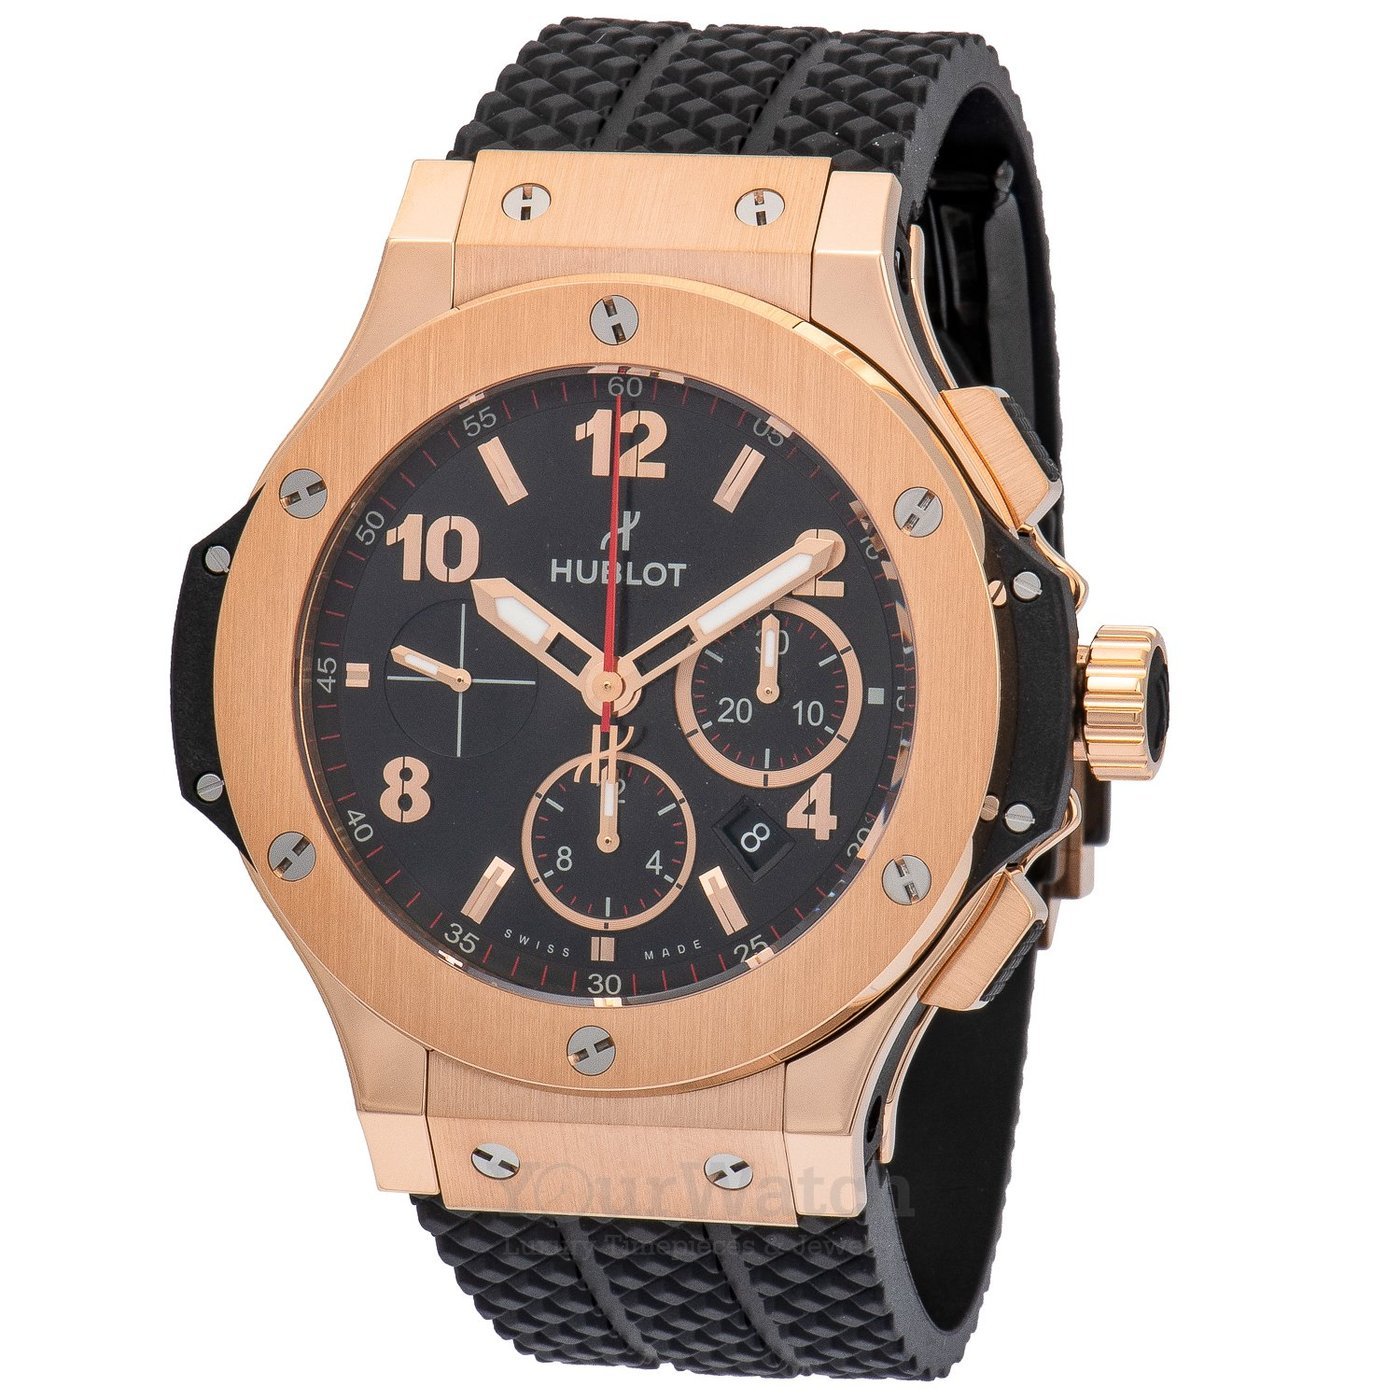 Hublot Watches for Men and Women - Luxury Watches USA